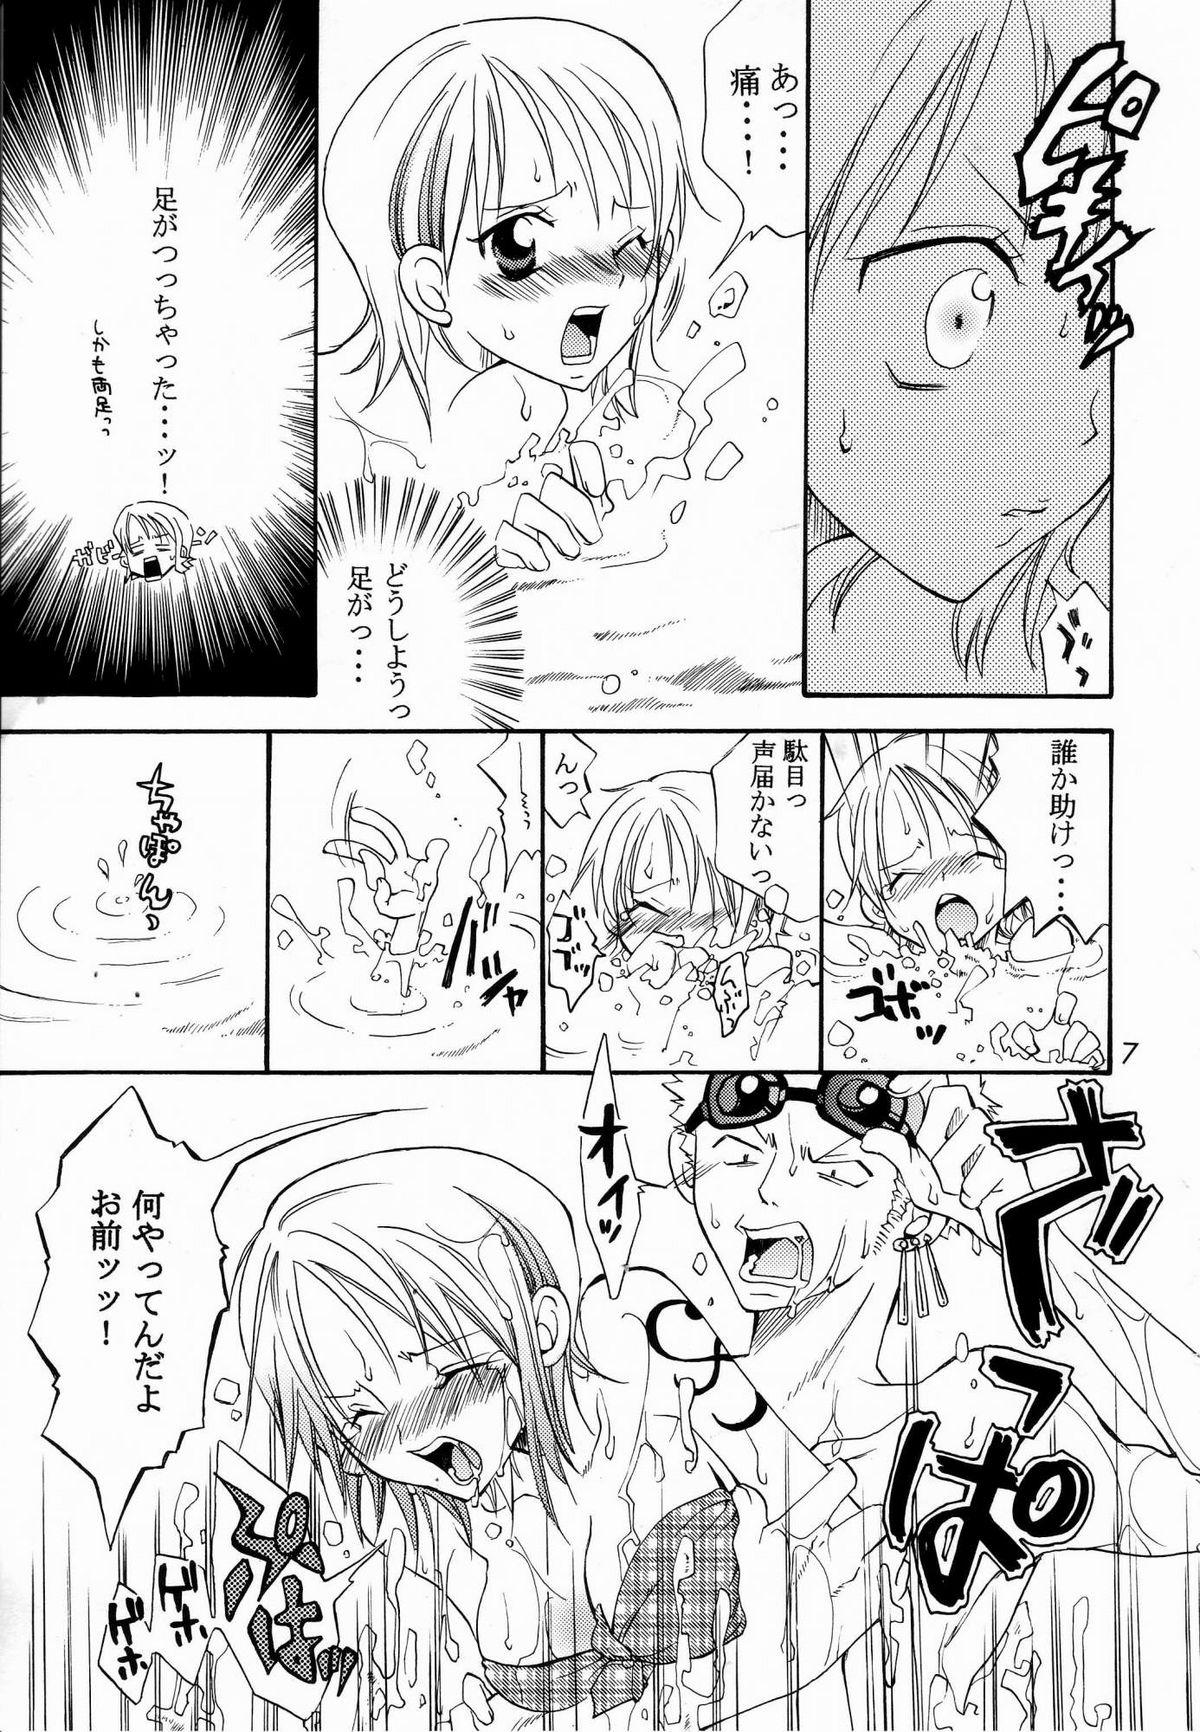 Thai Shiawase Punch! 5 - One piece Amatures Gone Wild - Page 6